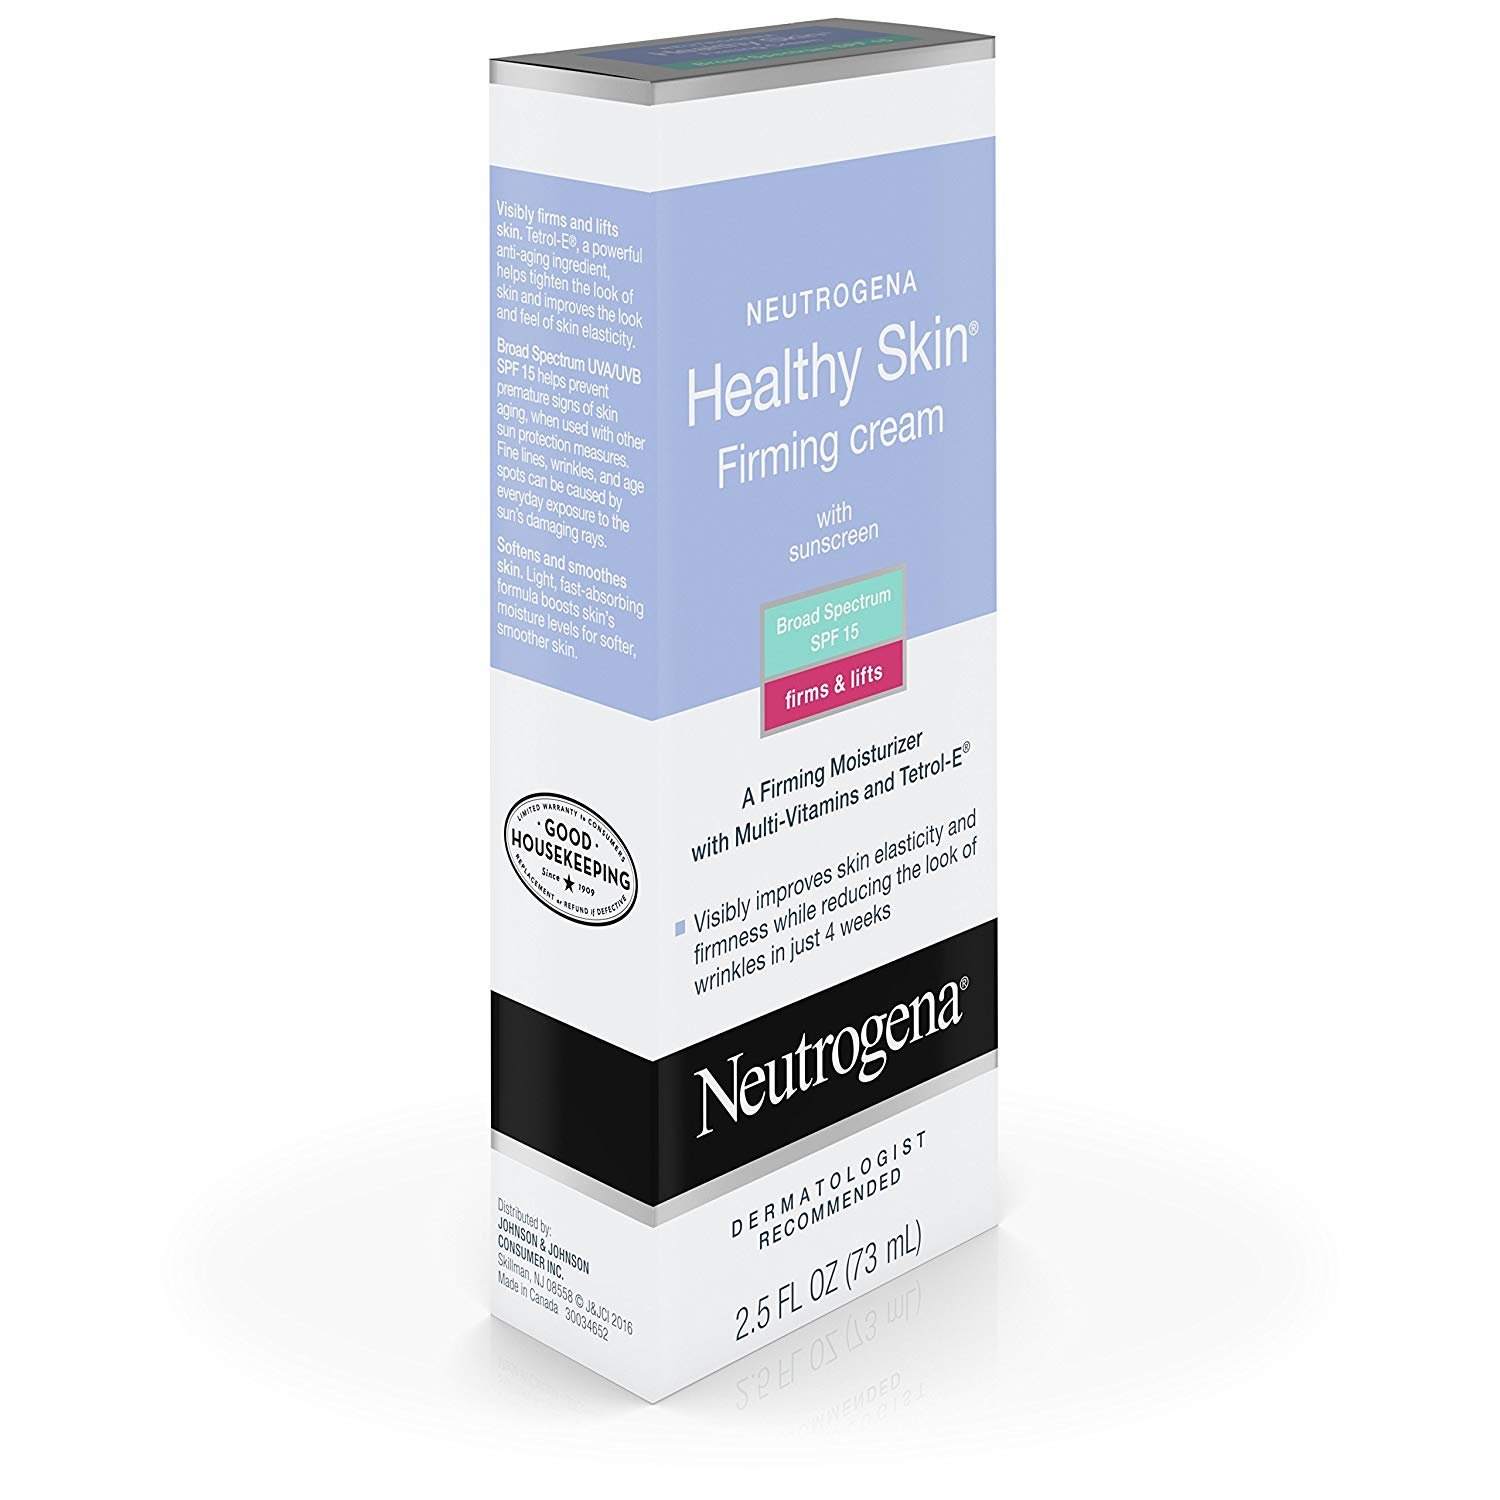 Neutrogena Healthy Skin Firming Cream with SPF 15 Sunscreen & Tetrol-E, Hypoallergenic & Non-Comedogenic Anti-Wrinkle Face Cream to Visibly Firm, Tighten & Lift Skin, 2.5 fl. oz - image 4 of 10